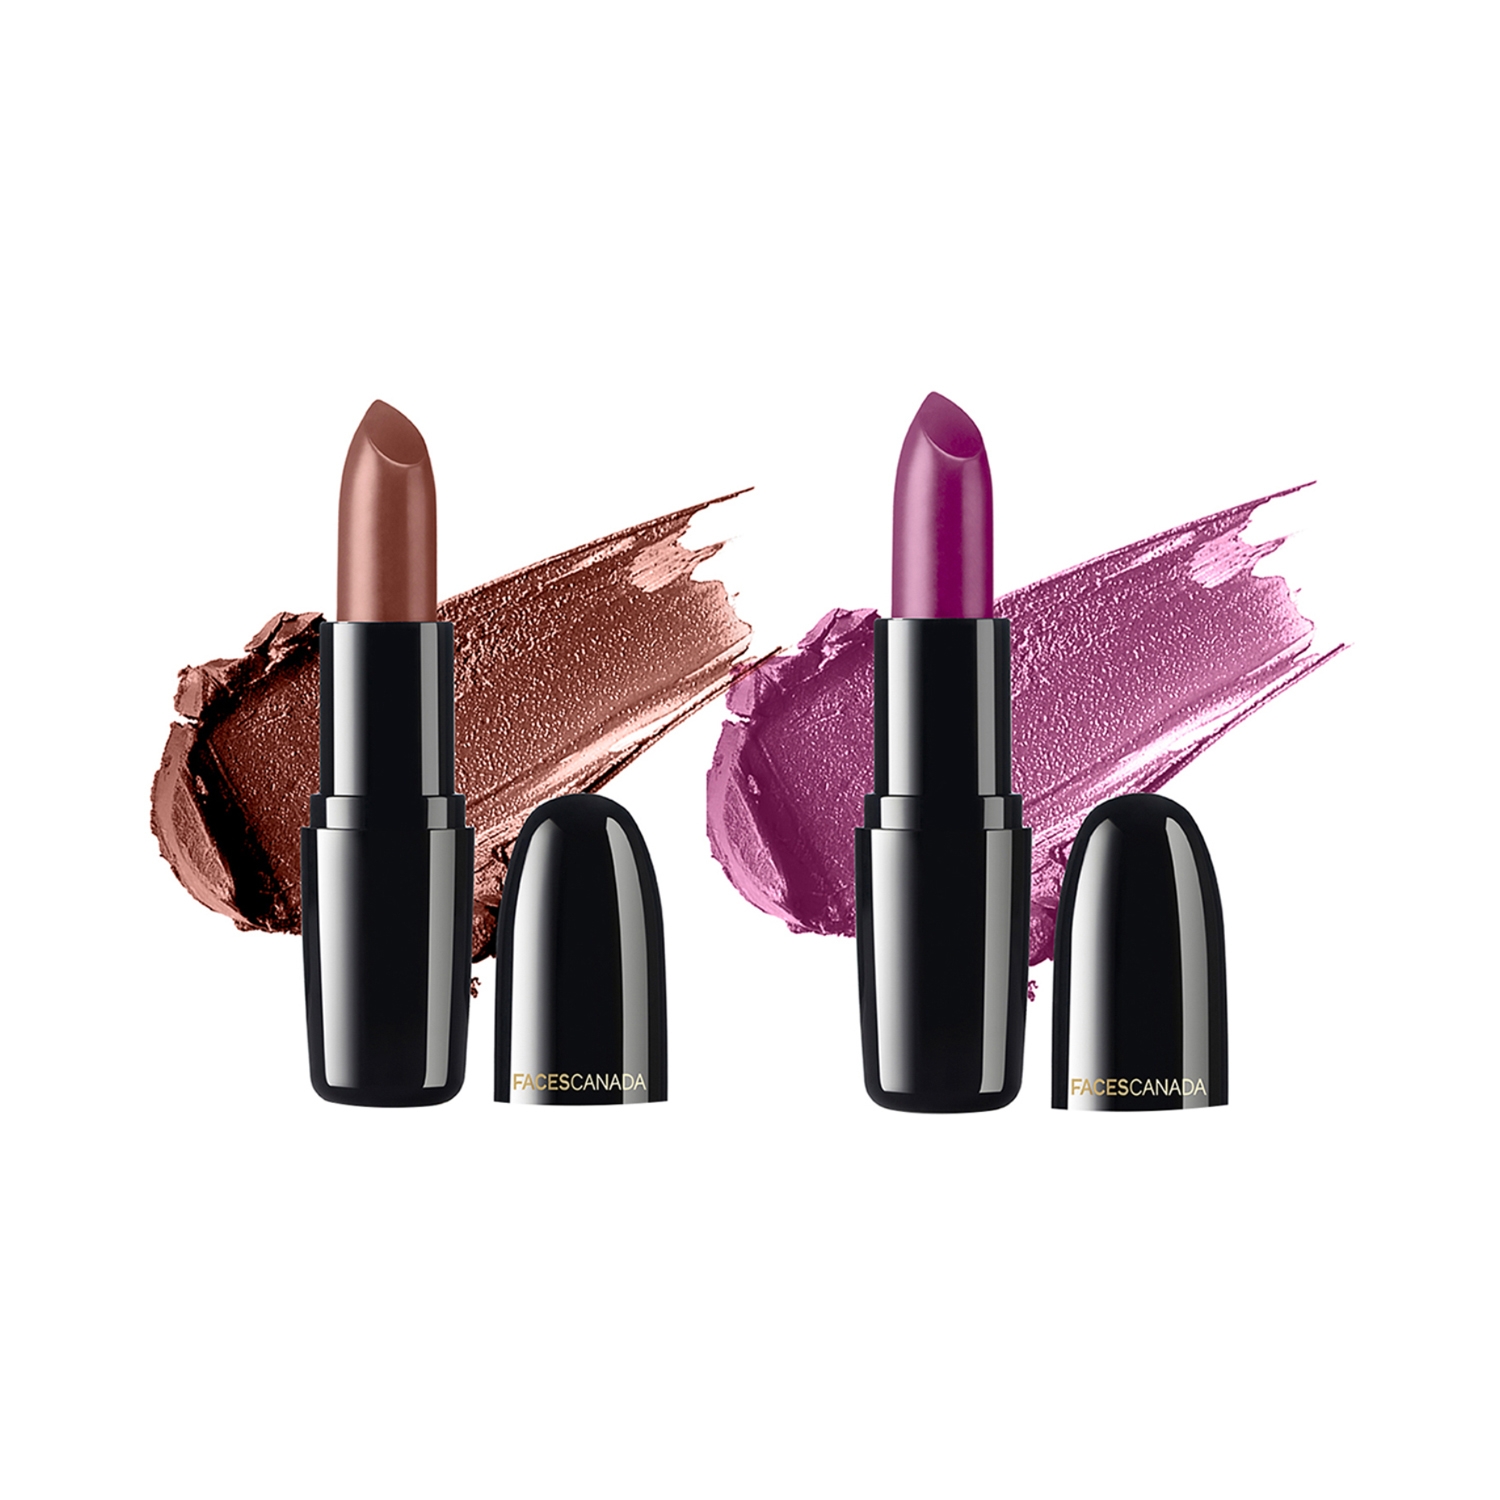 Faces Canada | Faces Canada Festive Pout Weightless Creme Lipstick Combo Pack - Sweet Mocha, Imperial Plum (2pcs)